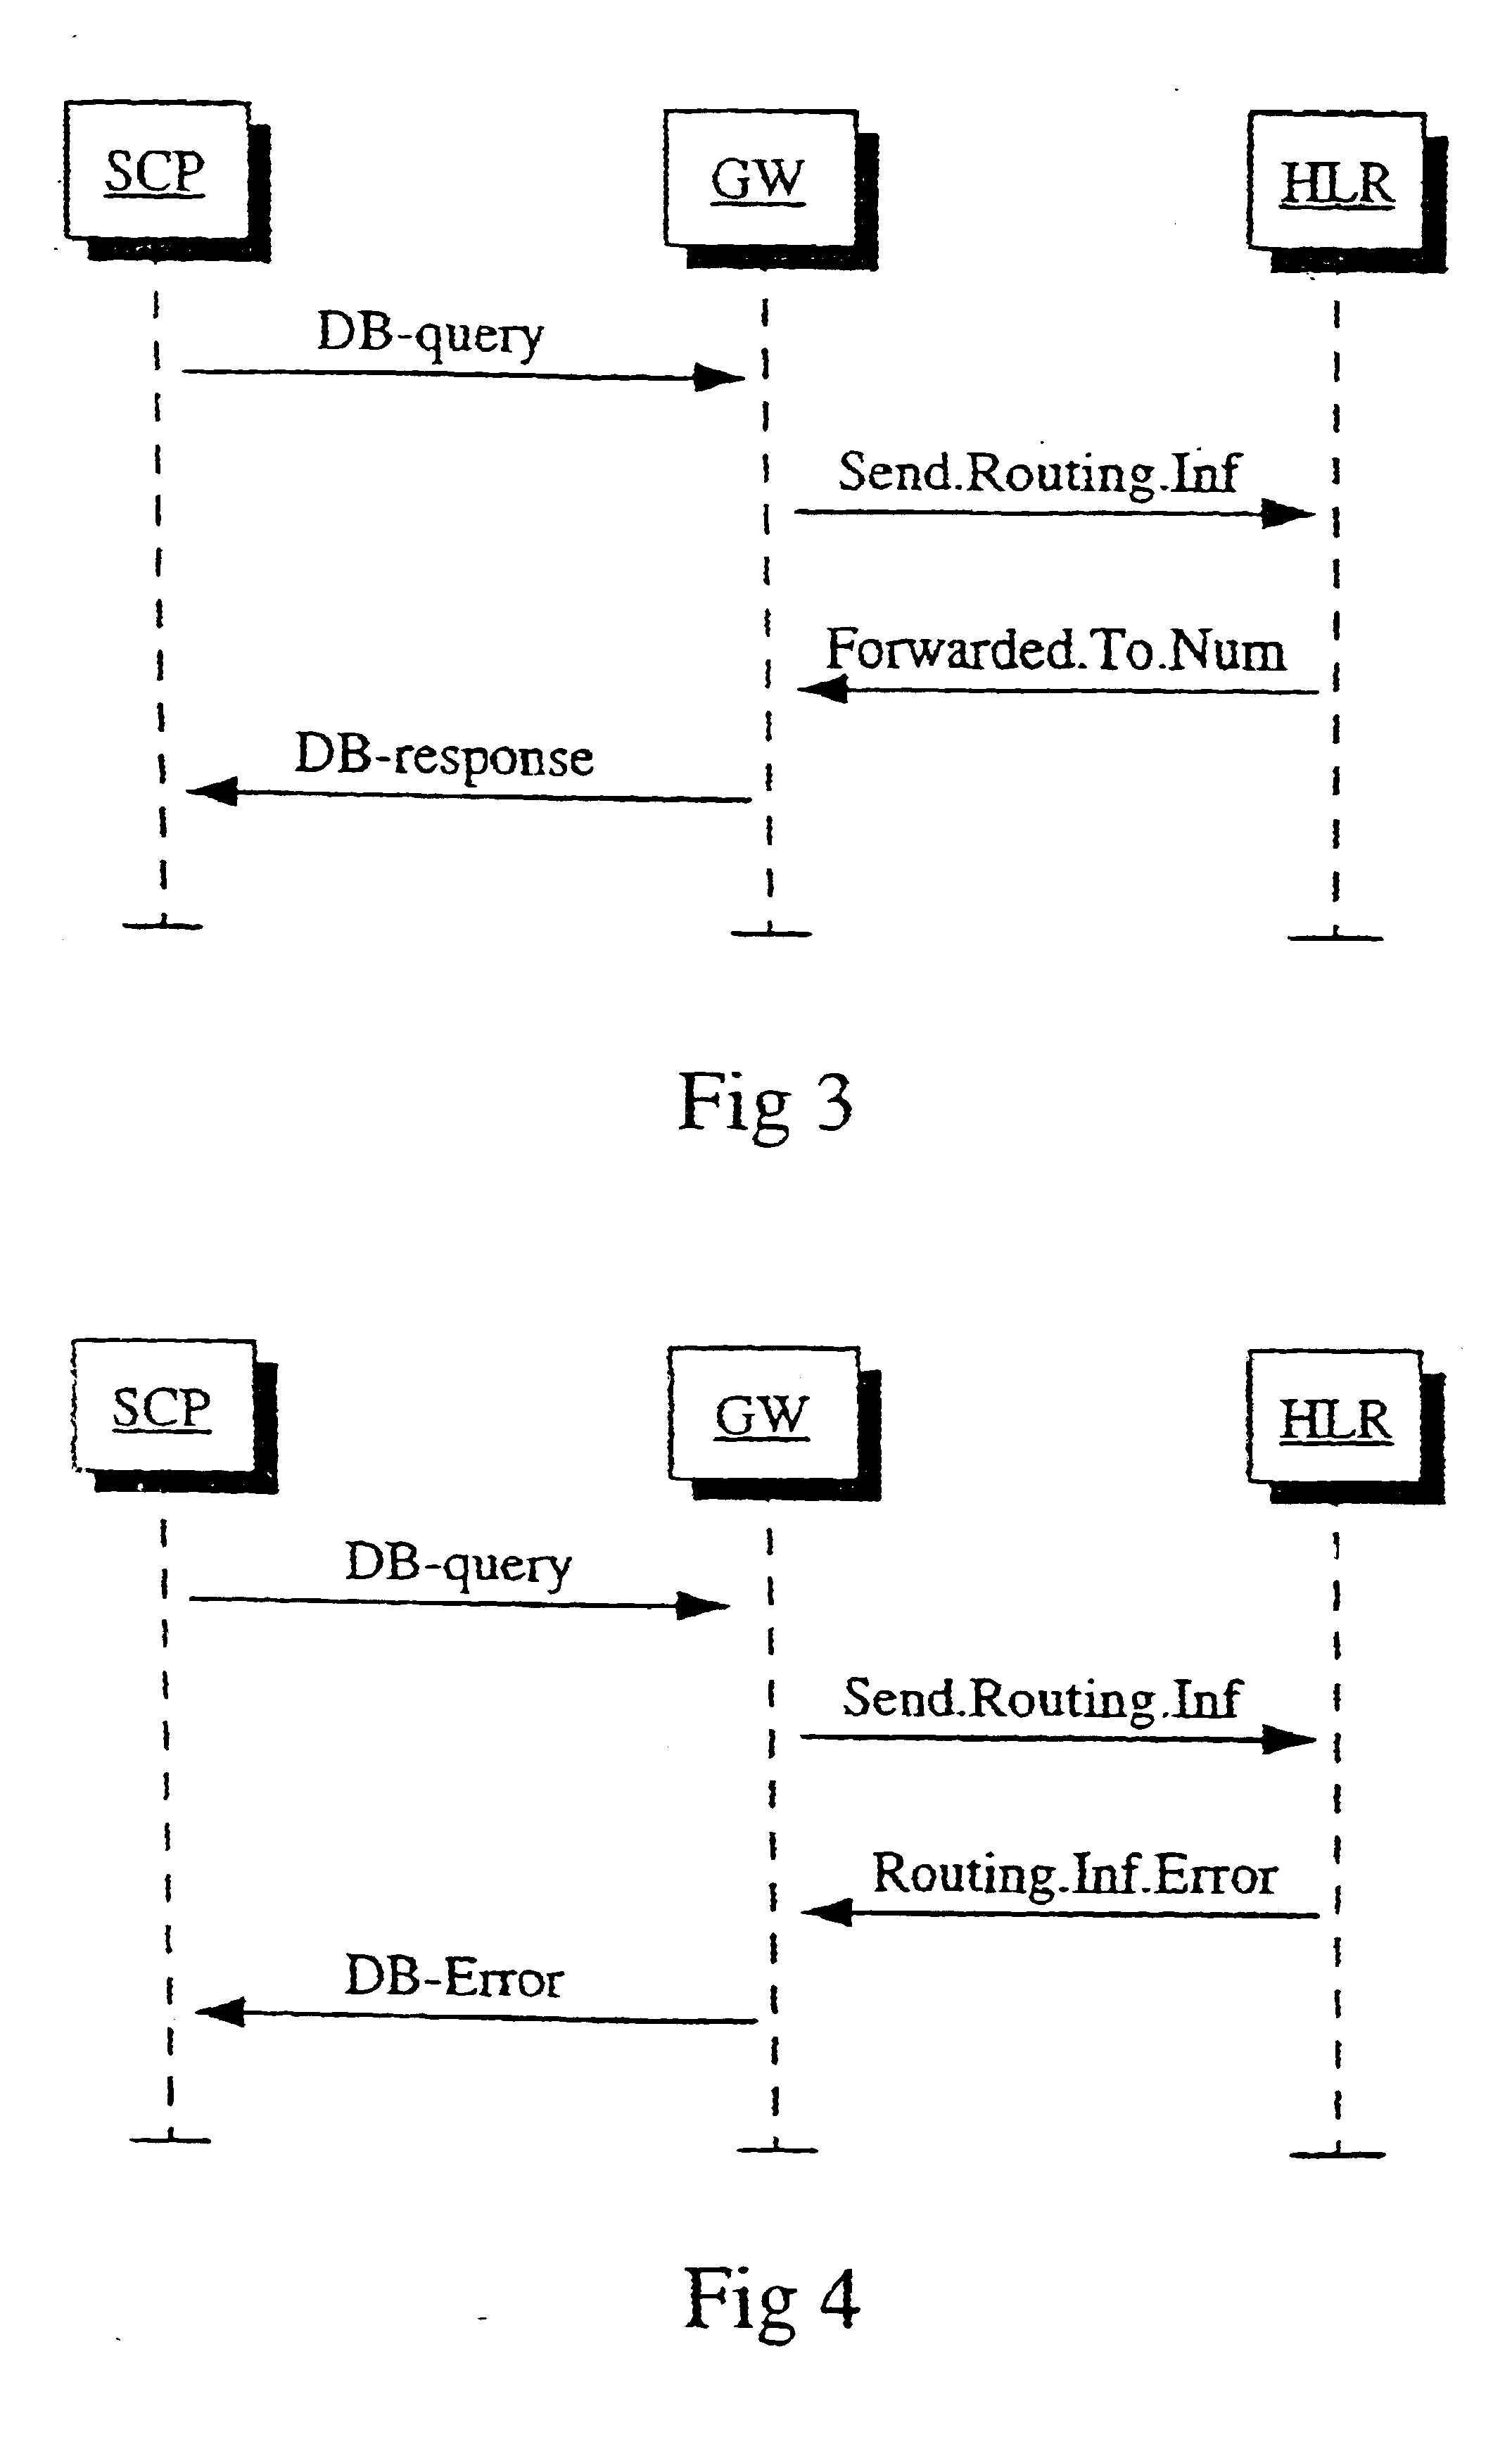 Procedure and system for the transmission of information and establishment of a telecommunication connection